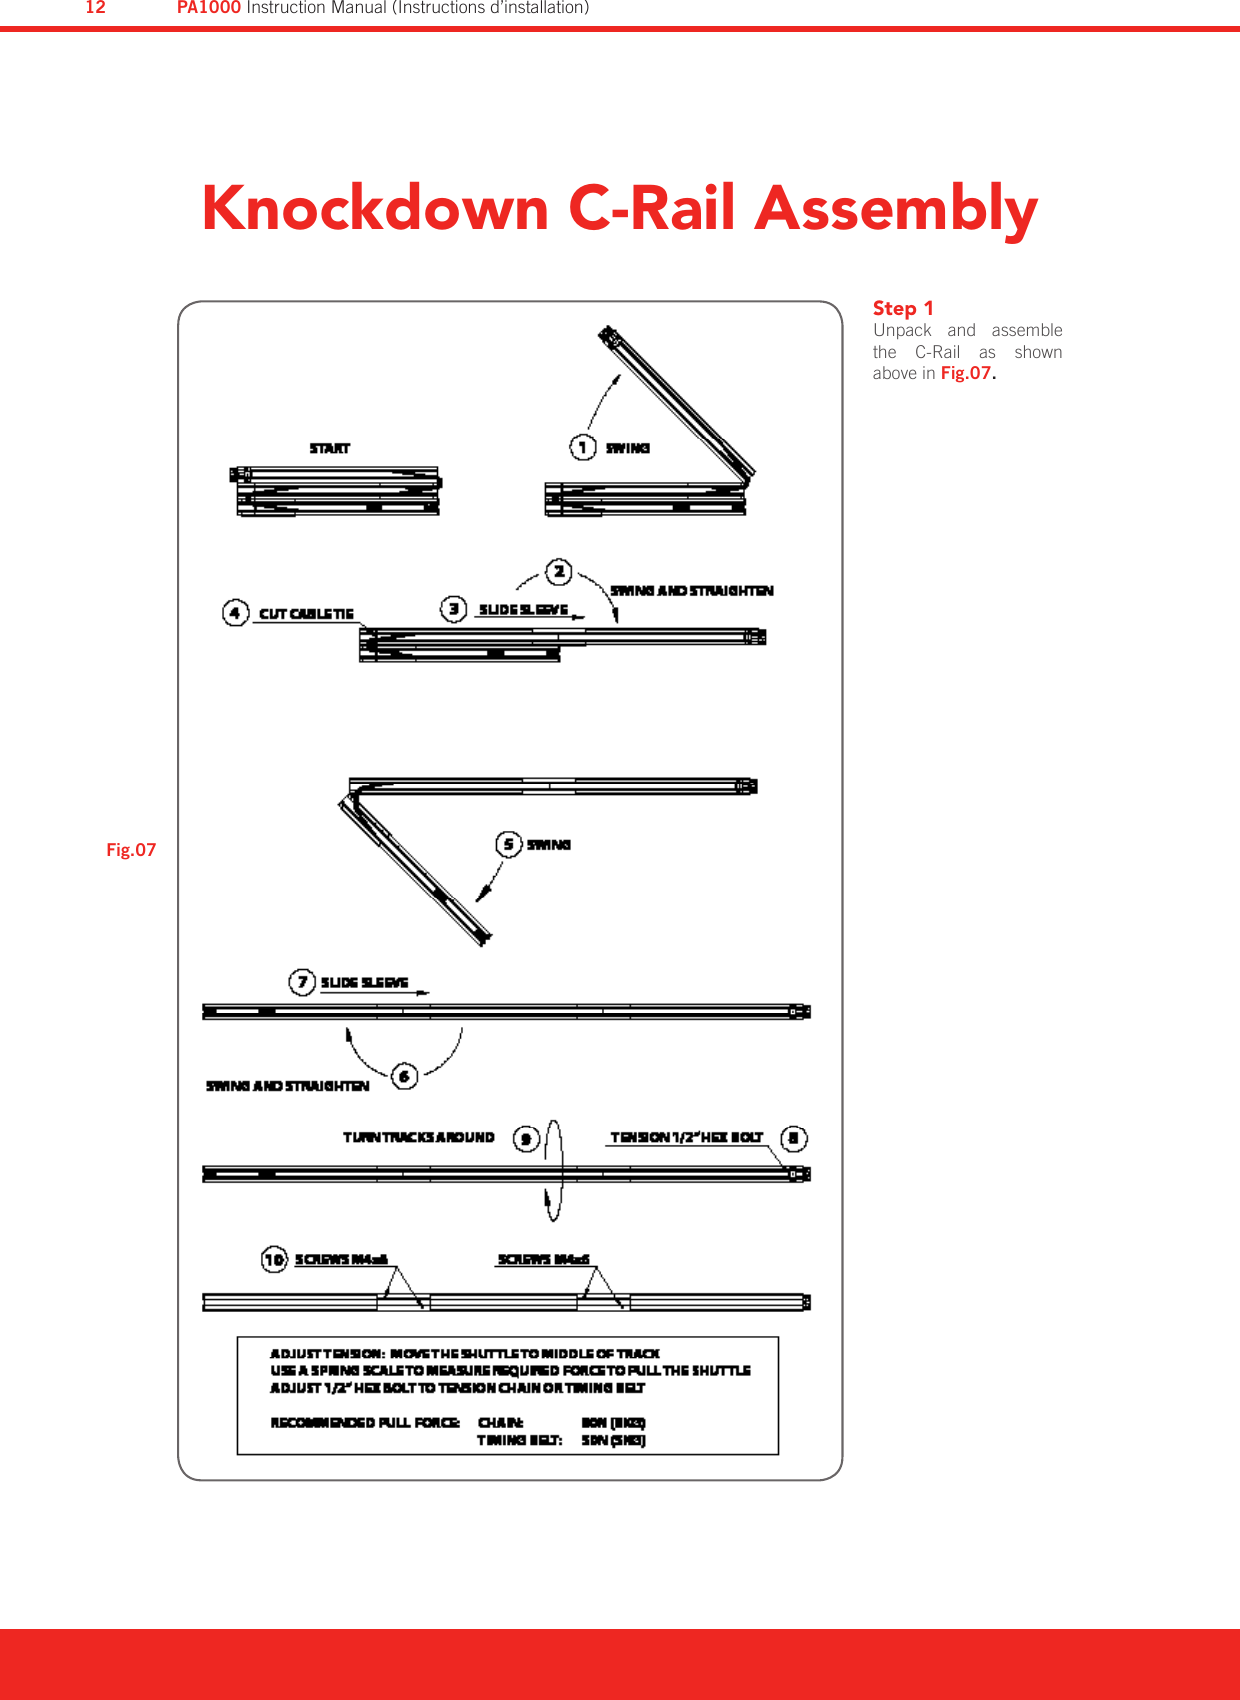 Knockdown C-Rail AssemblyStep 1Unpack  and  assemble the  C-Rail  as  shown above in Fig.07.Fig.07PA1000 Instruction Manual (Instructions d’installation)12